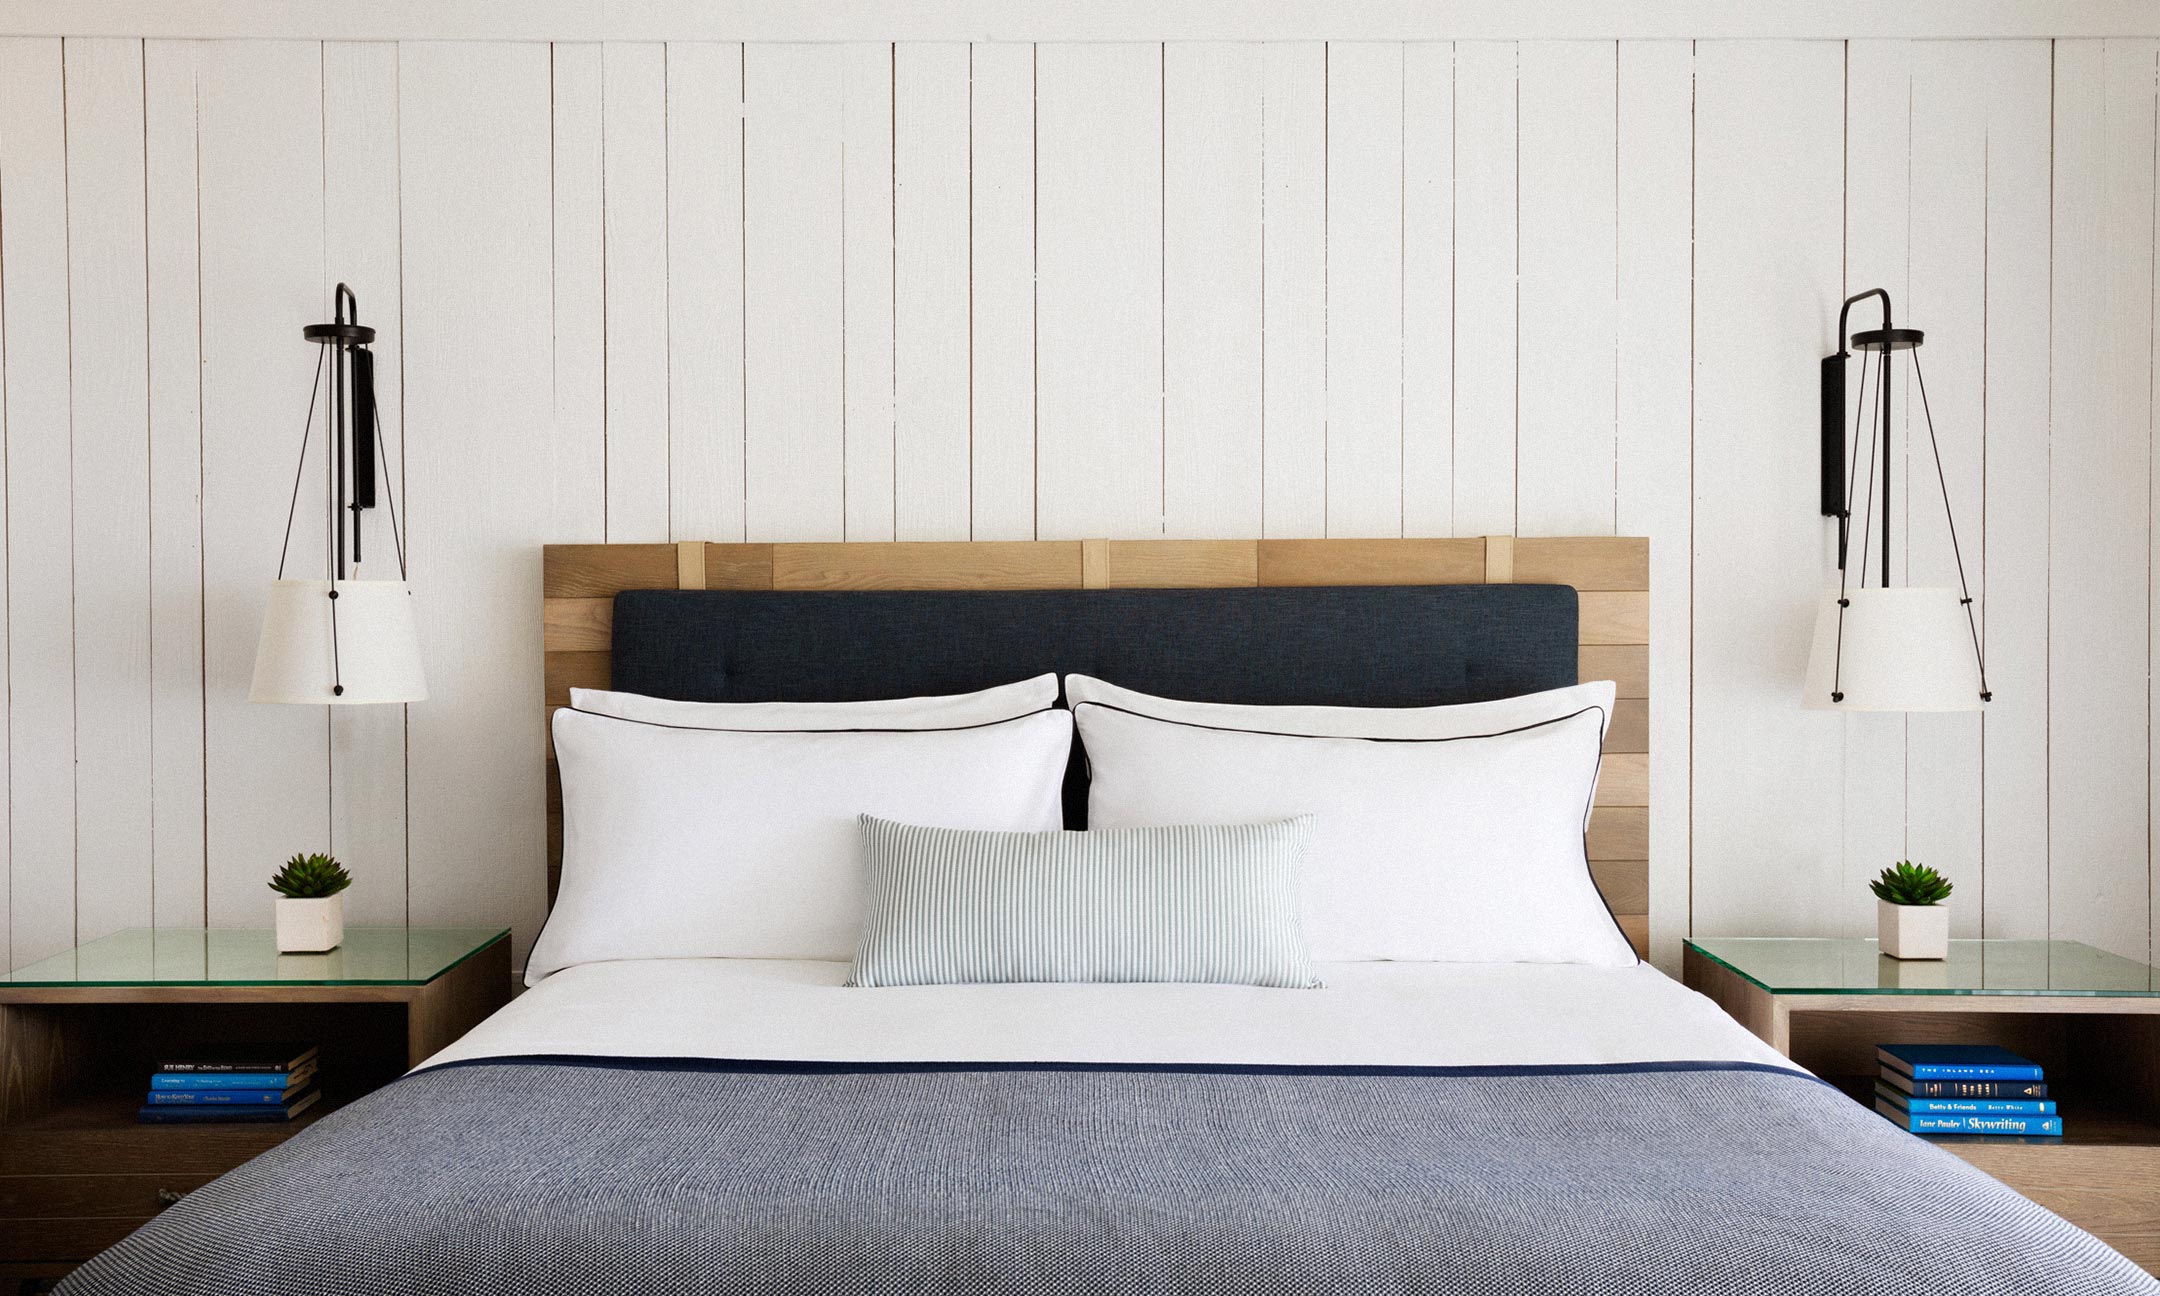 Bed with side tables and two hanging lamps with white plank wall